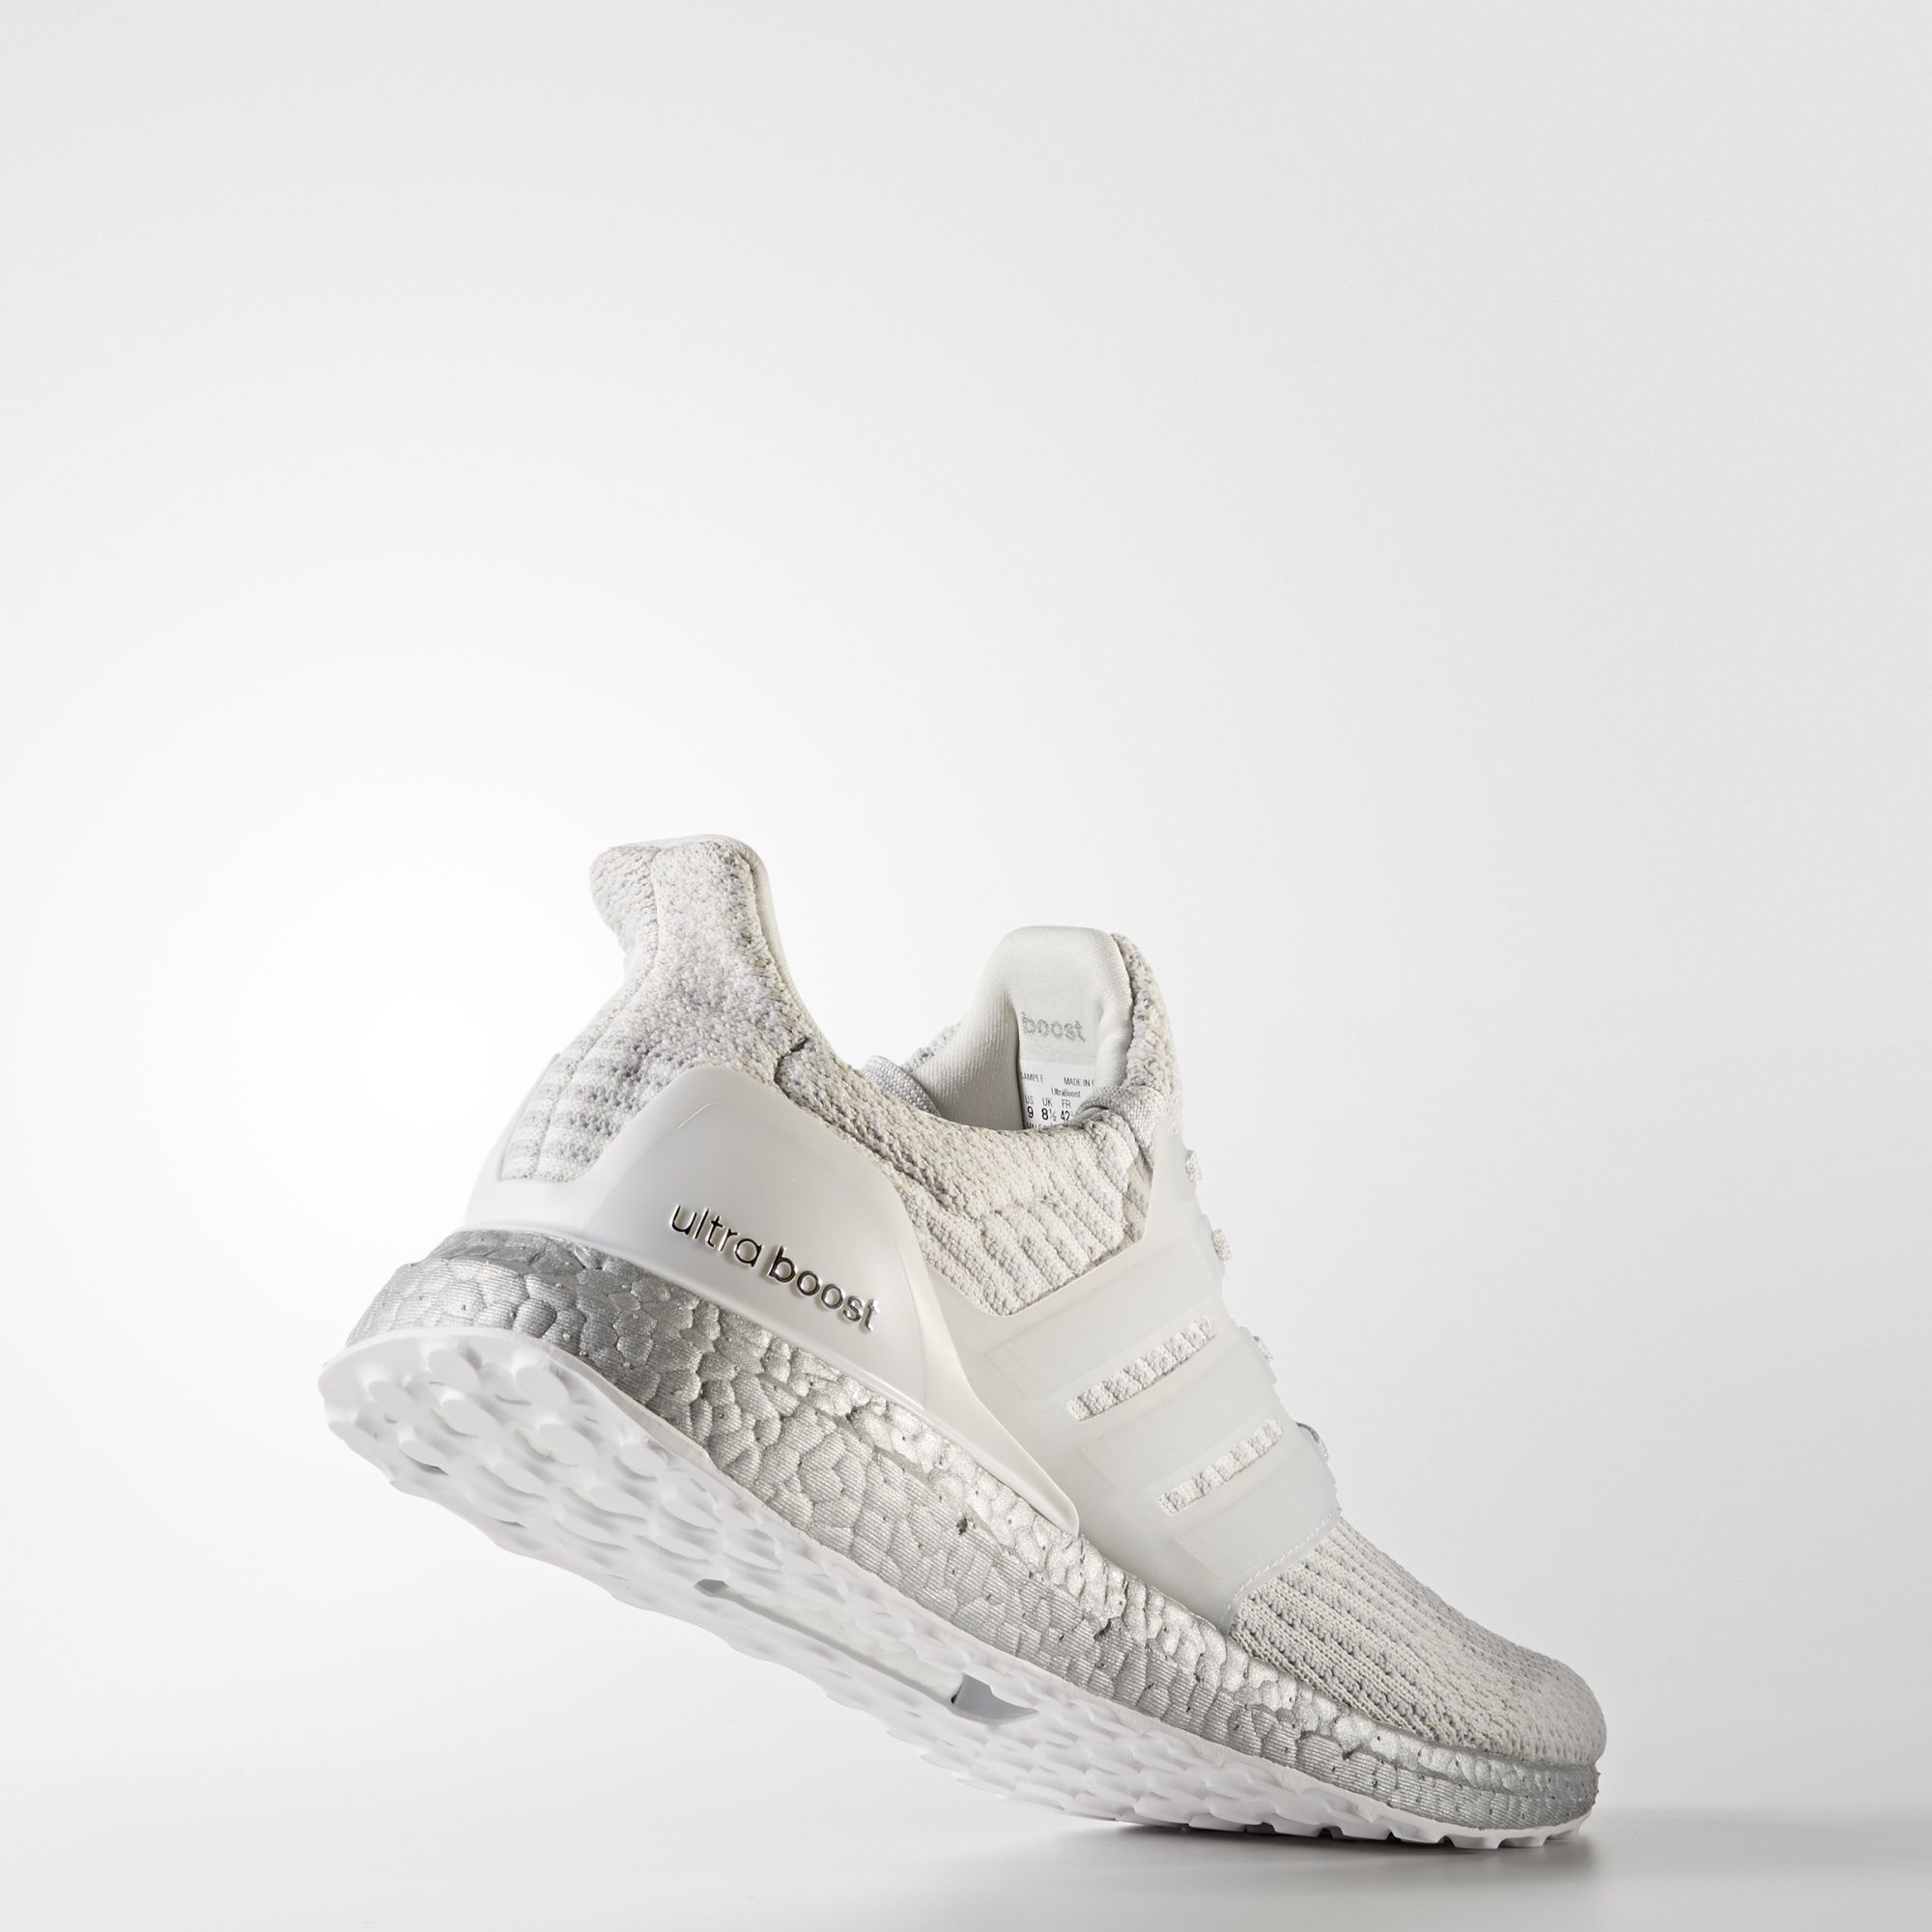 Adidas Ultra Boost
Crystal White / Clear Brown